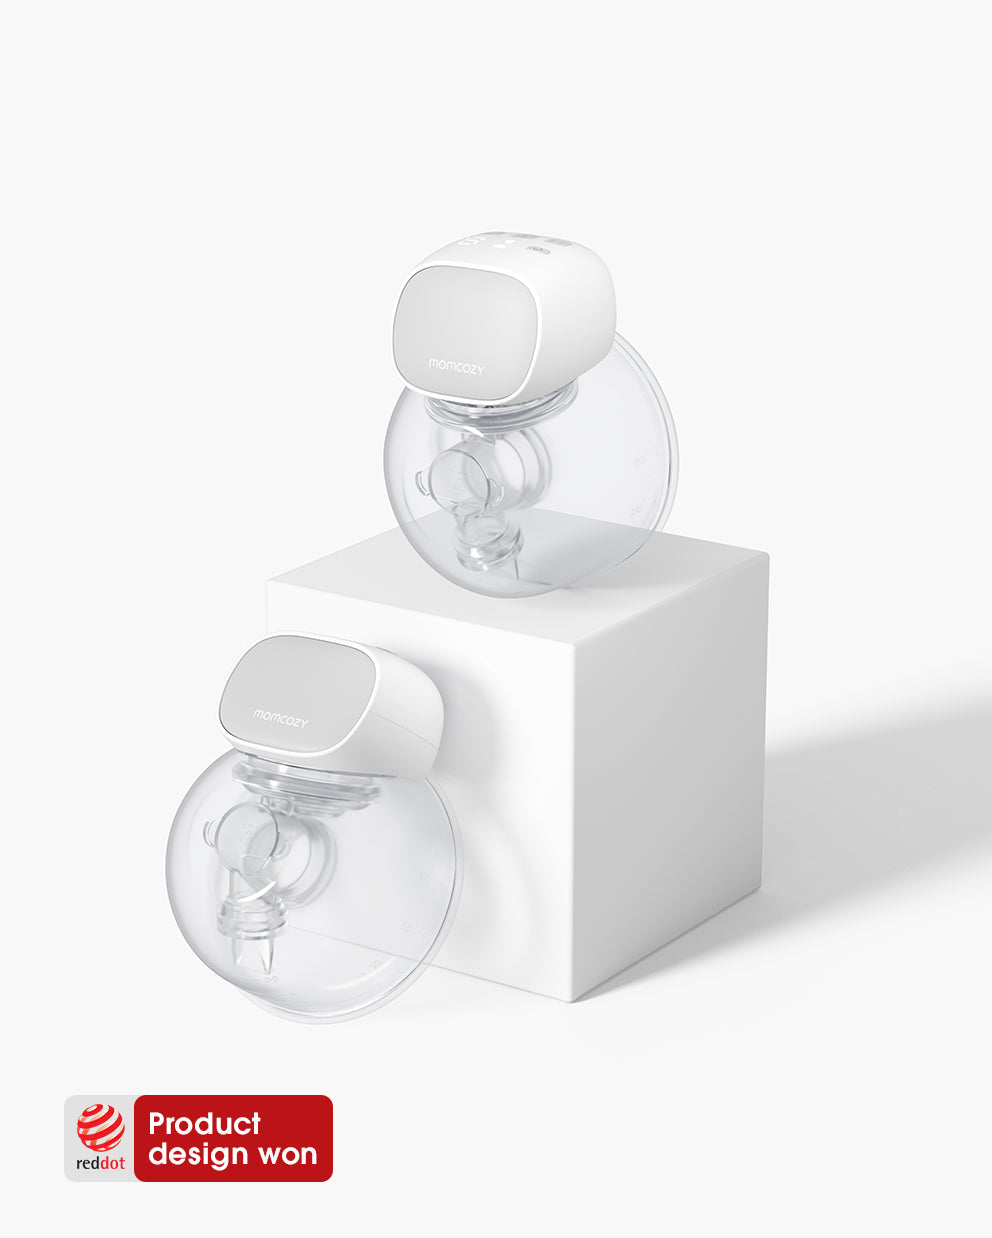 Momcozy Milk Collector Only Compatible with Momcozy S9 Pro/S12 Pro NOT for  S9/S12. Original S9 Pro/S12 Pro Breast Pump Replacement Accessories, 1 Pack